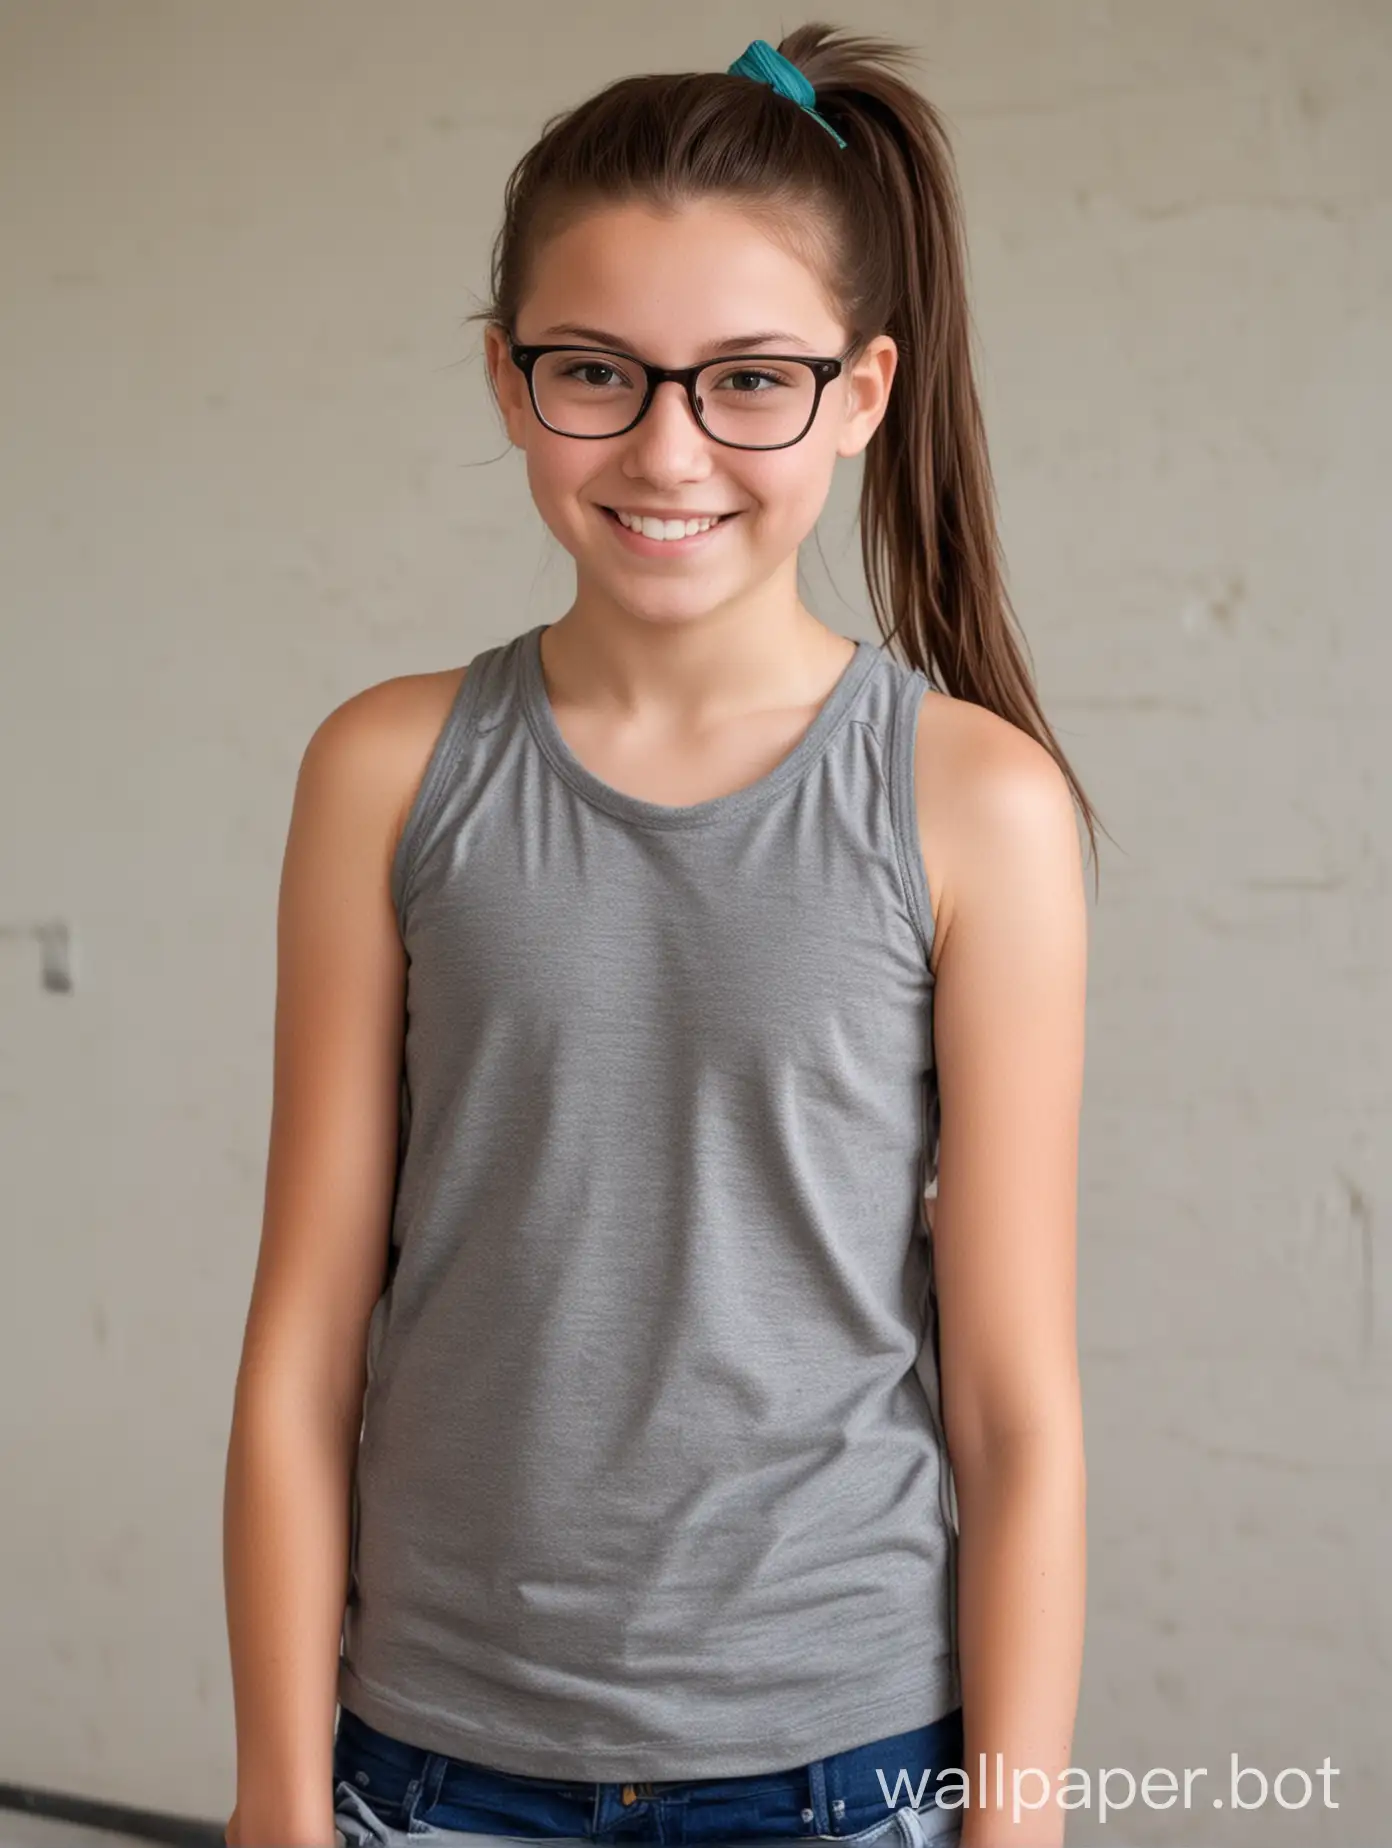 Shy-Teenager-with-Glasses-and-Ponytail-at-School